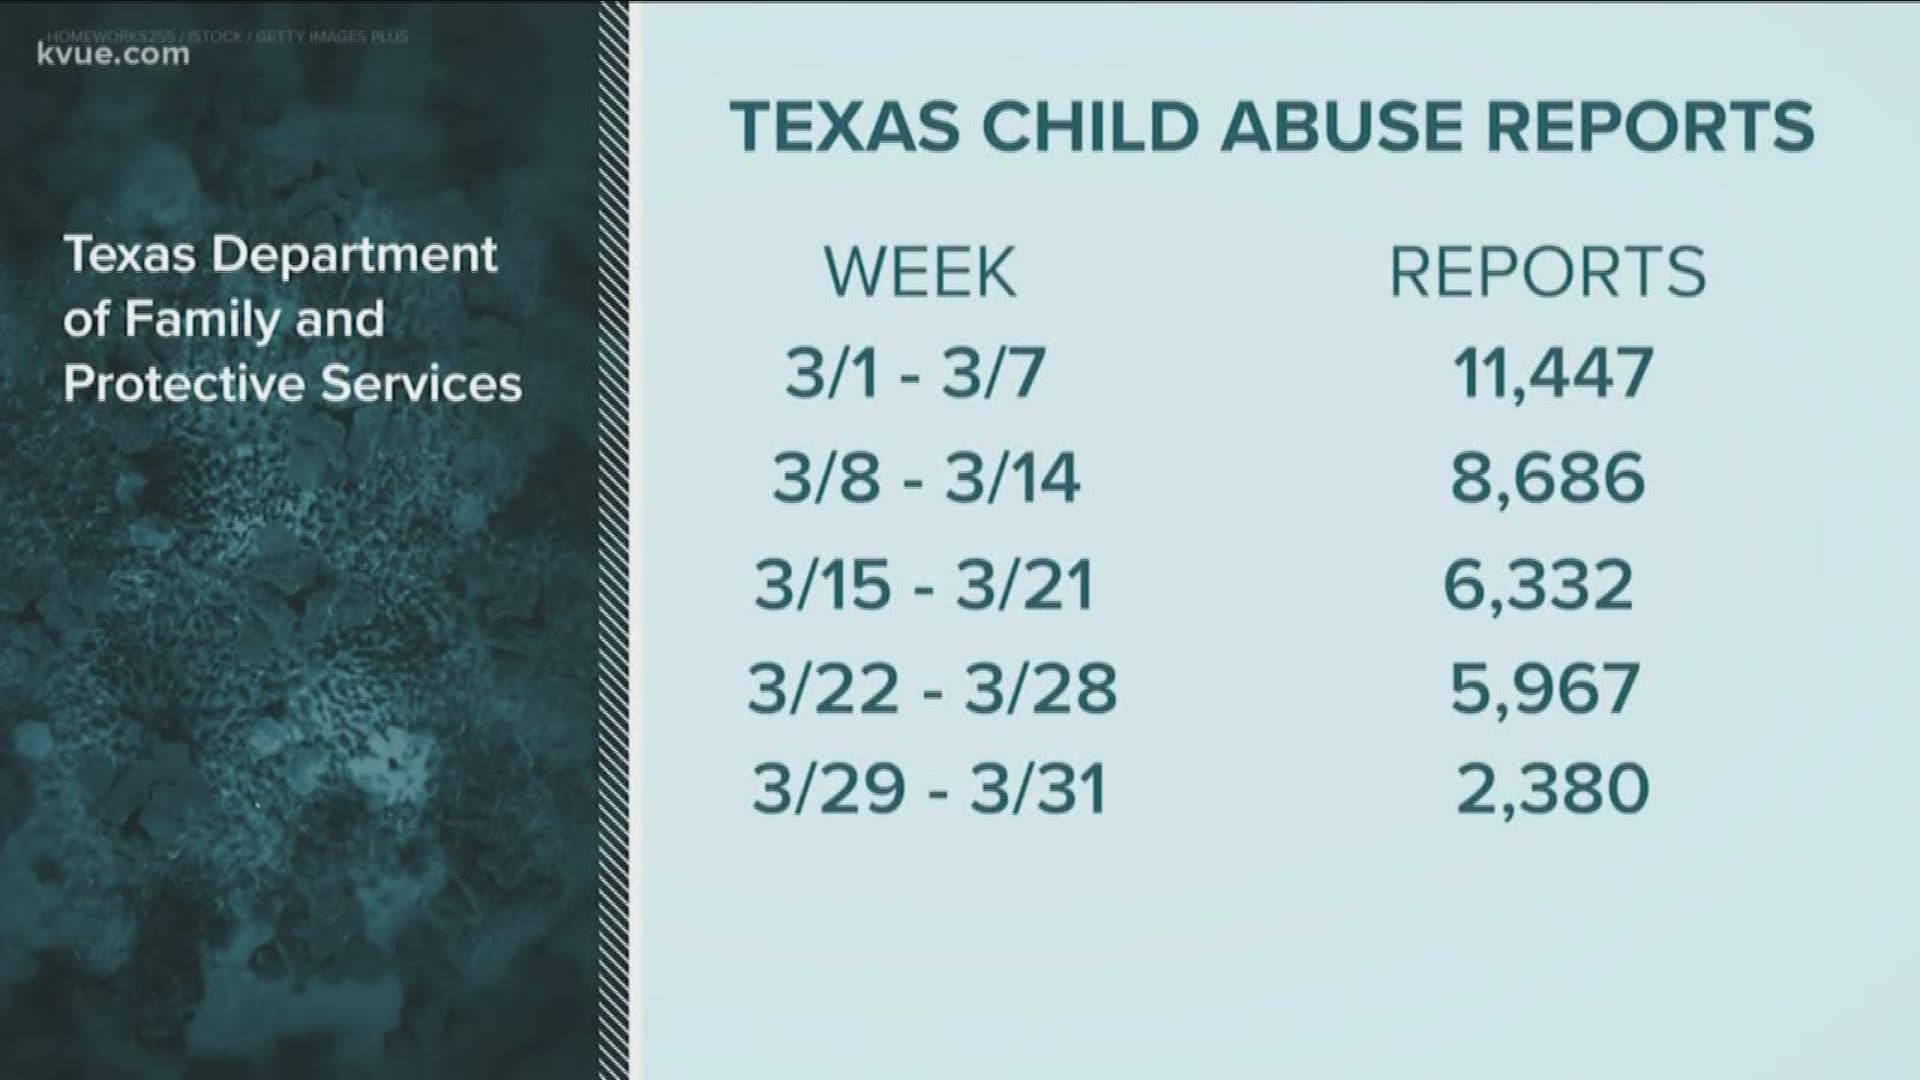 The KVUE Defenders investigated how "stay home" orders might impact the number of child abuse reports in Texas.